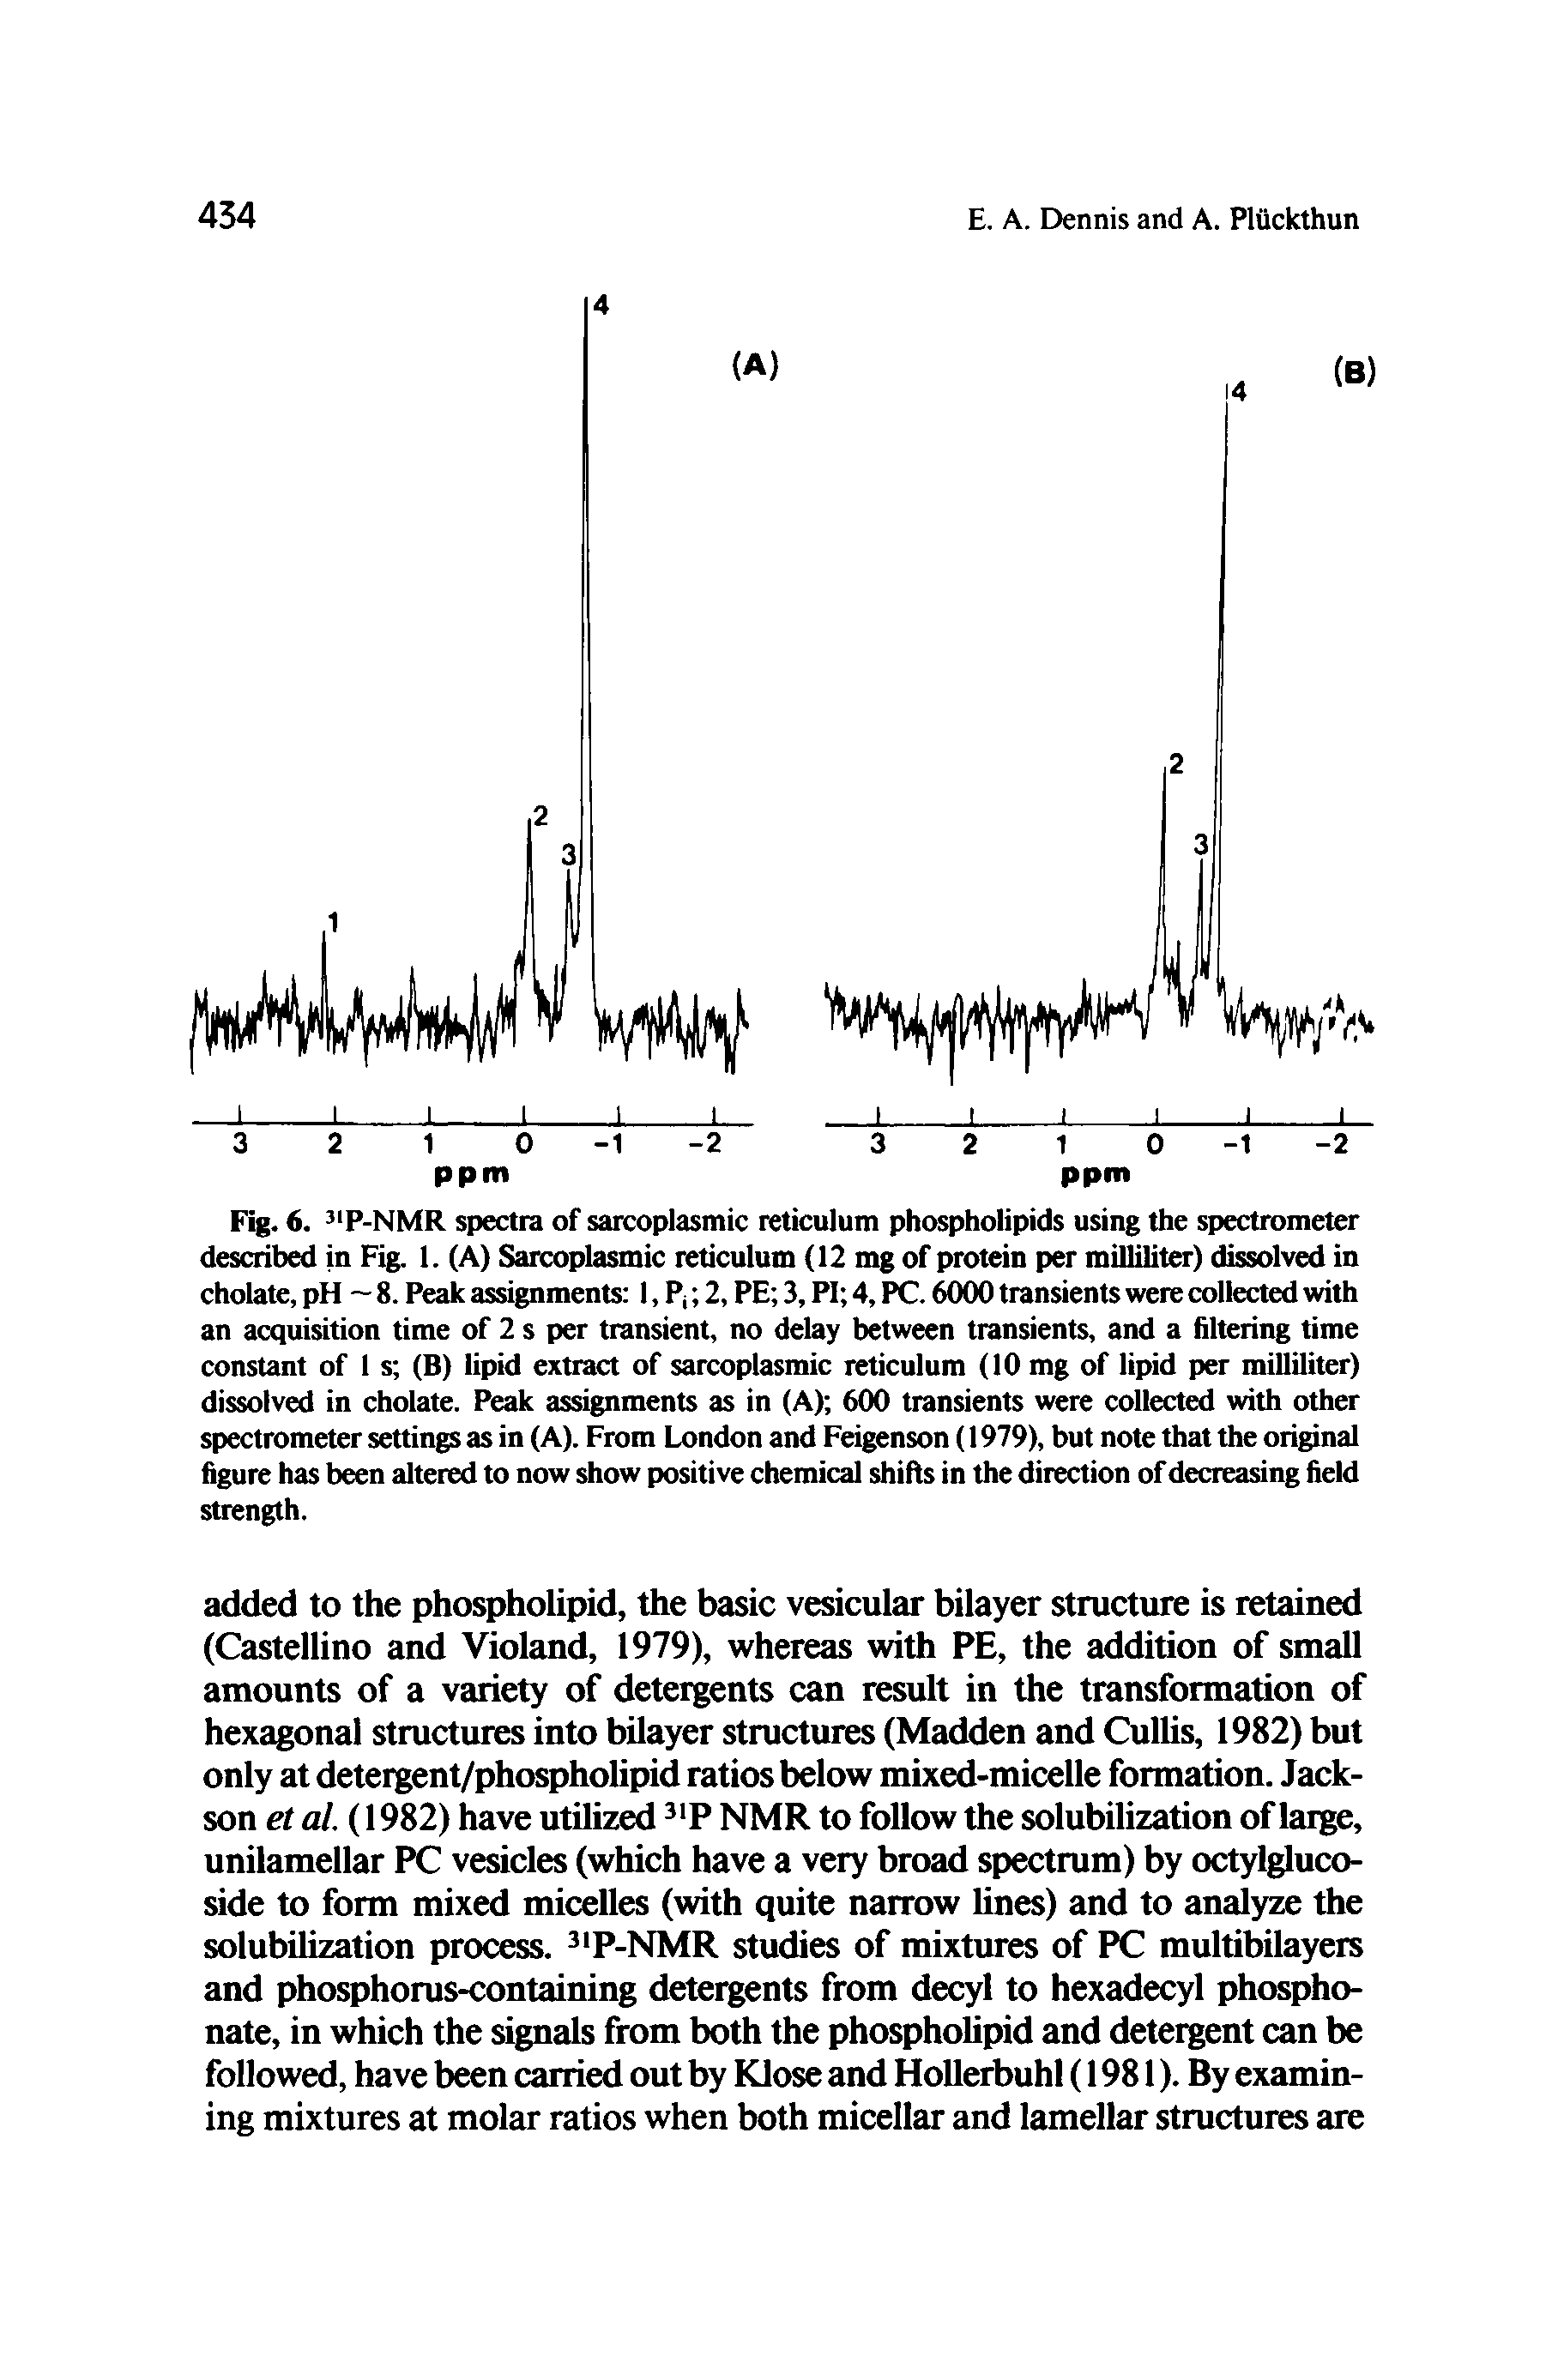 Fig. 6. 3 P-NMR spectra of sarcoplasmic reticulum phospholipids using the spectrometer described in Fig. 1. (A) Sarcoplasmic reticulum (12 mg of protein per milliliter) dissolved in cholate, pH 8. Peak assignments 1, P 2, PE 3, PI 4, PC. 6000 transients were collected with an acquisition time of 2 s per transient, no delay between transients, and a filtering time constant of 1 s (B) lipid extract of sarcoplasmic reticulum (10 mg of lipid per milliliter) dissolved in cholate. Peak assignments as in (A) 600 transients were collected with other spectrometer settings as in (A). From London and Feigenson (1979), but note that the original figure has been altered to now show positive chemical shifts in the direction of decreasing field strength.